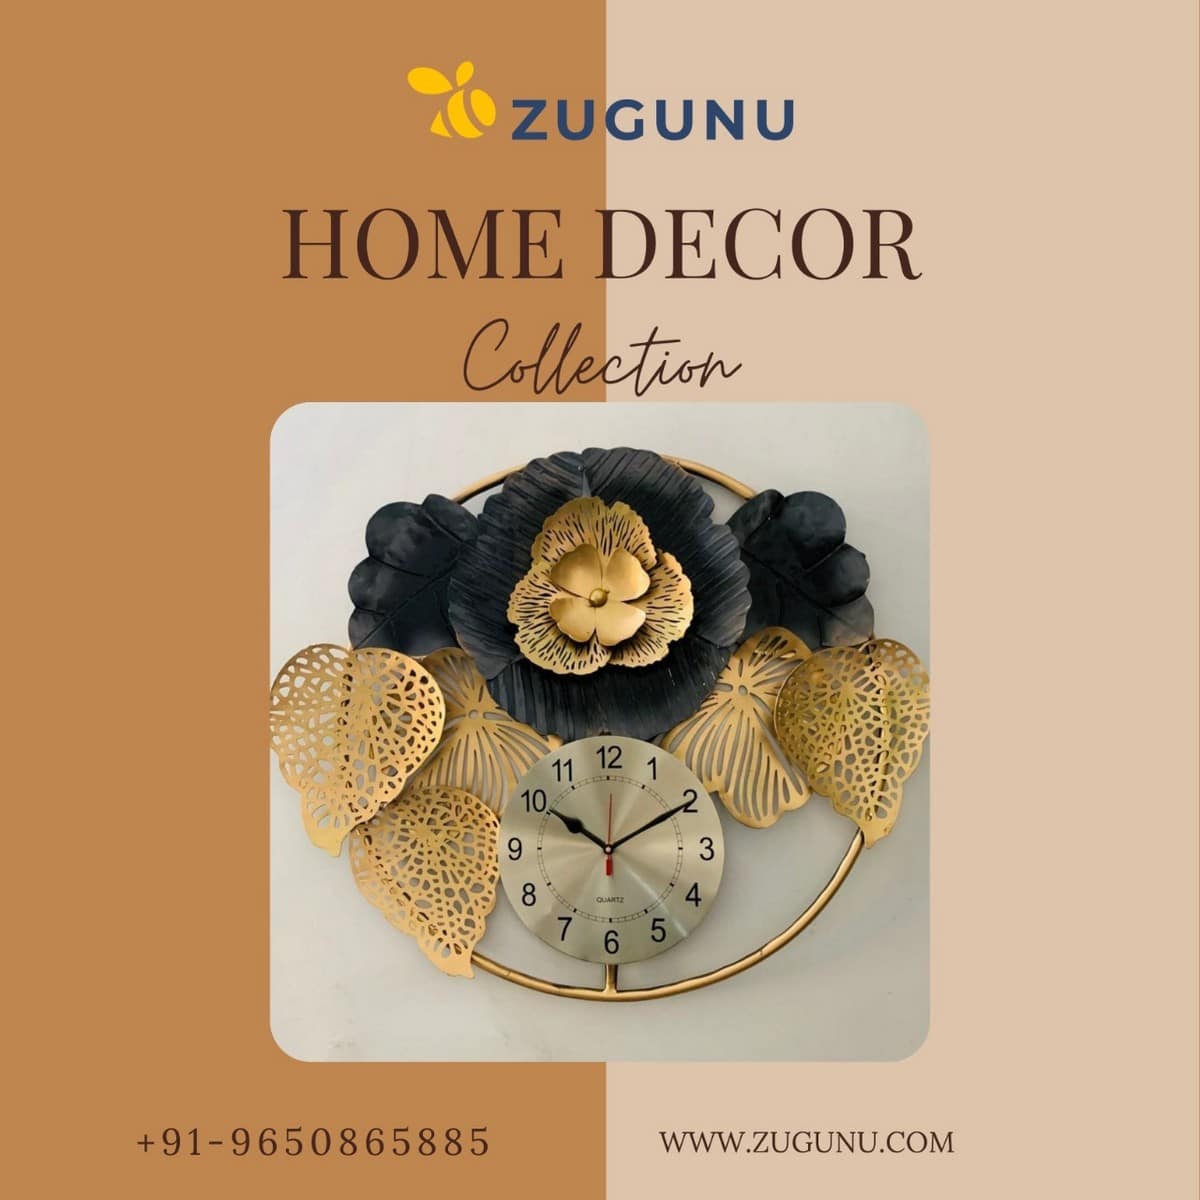 Zugunu Home Decor Collection With Fresh Designs And Affordable Prices Are Available At Our Site